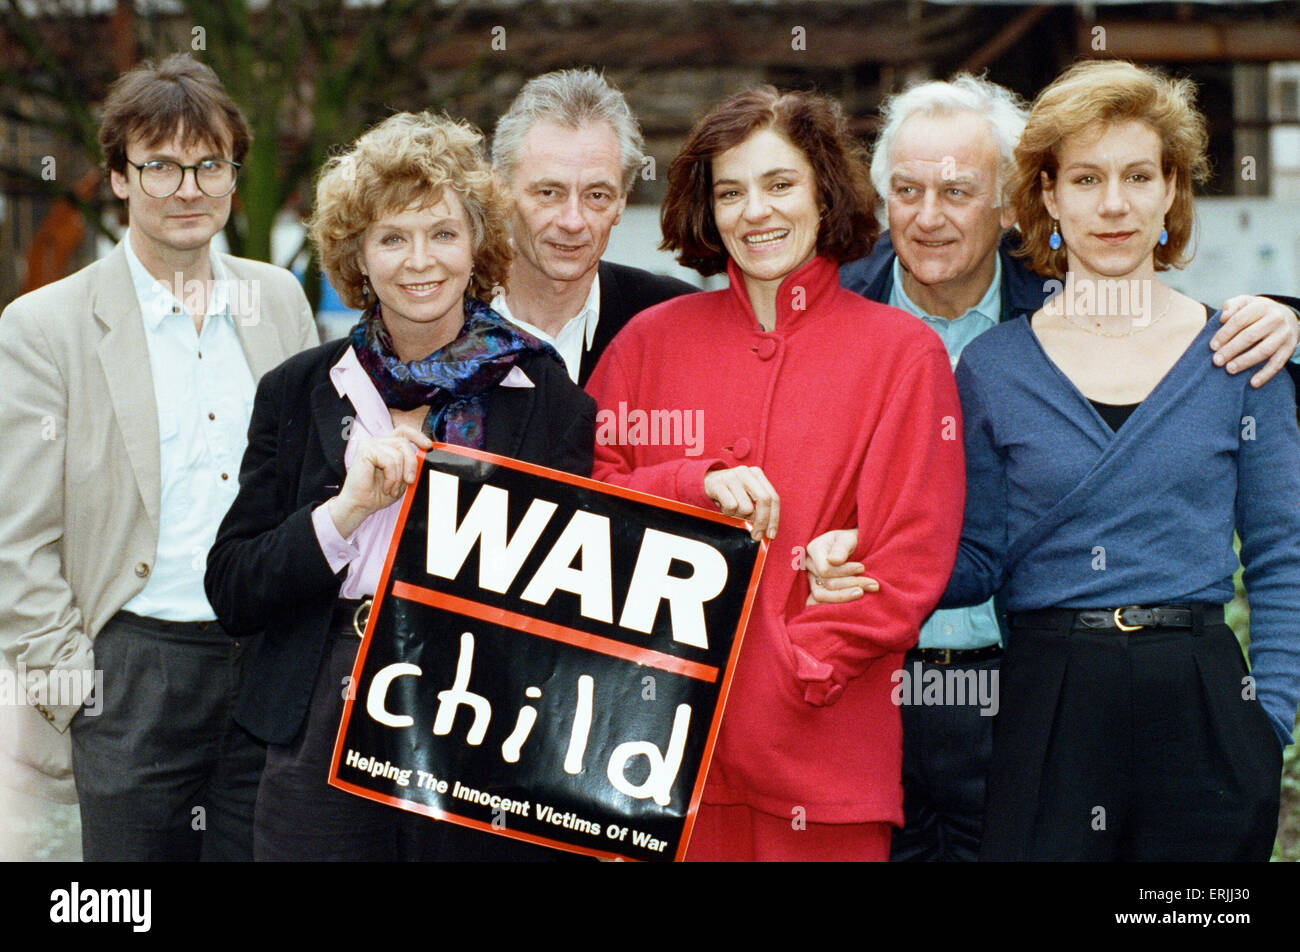 Supporters of the War Child Charity John Shaw (second from right) and Juliet Stevenson (far right). War Child was founded in 1993 by British filmmakers Bill Leeson and David Wilson when they returned from filming in the war in former Yugoslavia. In 1993 the first War Child convoy with equipment and food to run a mobile bakery travelled to former Yugoslavia. War Child Netherlands was founded shortly after in 1994 by Willemijn Verloop when she met Music Therapy professor Nigel Osborne during the war in Bosnia; War Child Holland programmes have since always focussed on psychosocial aid. War Child Stock Photo